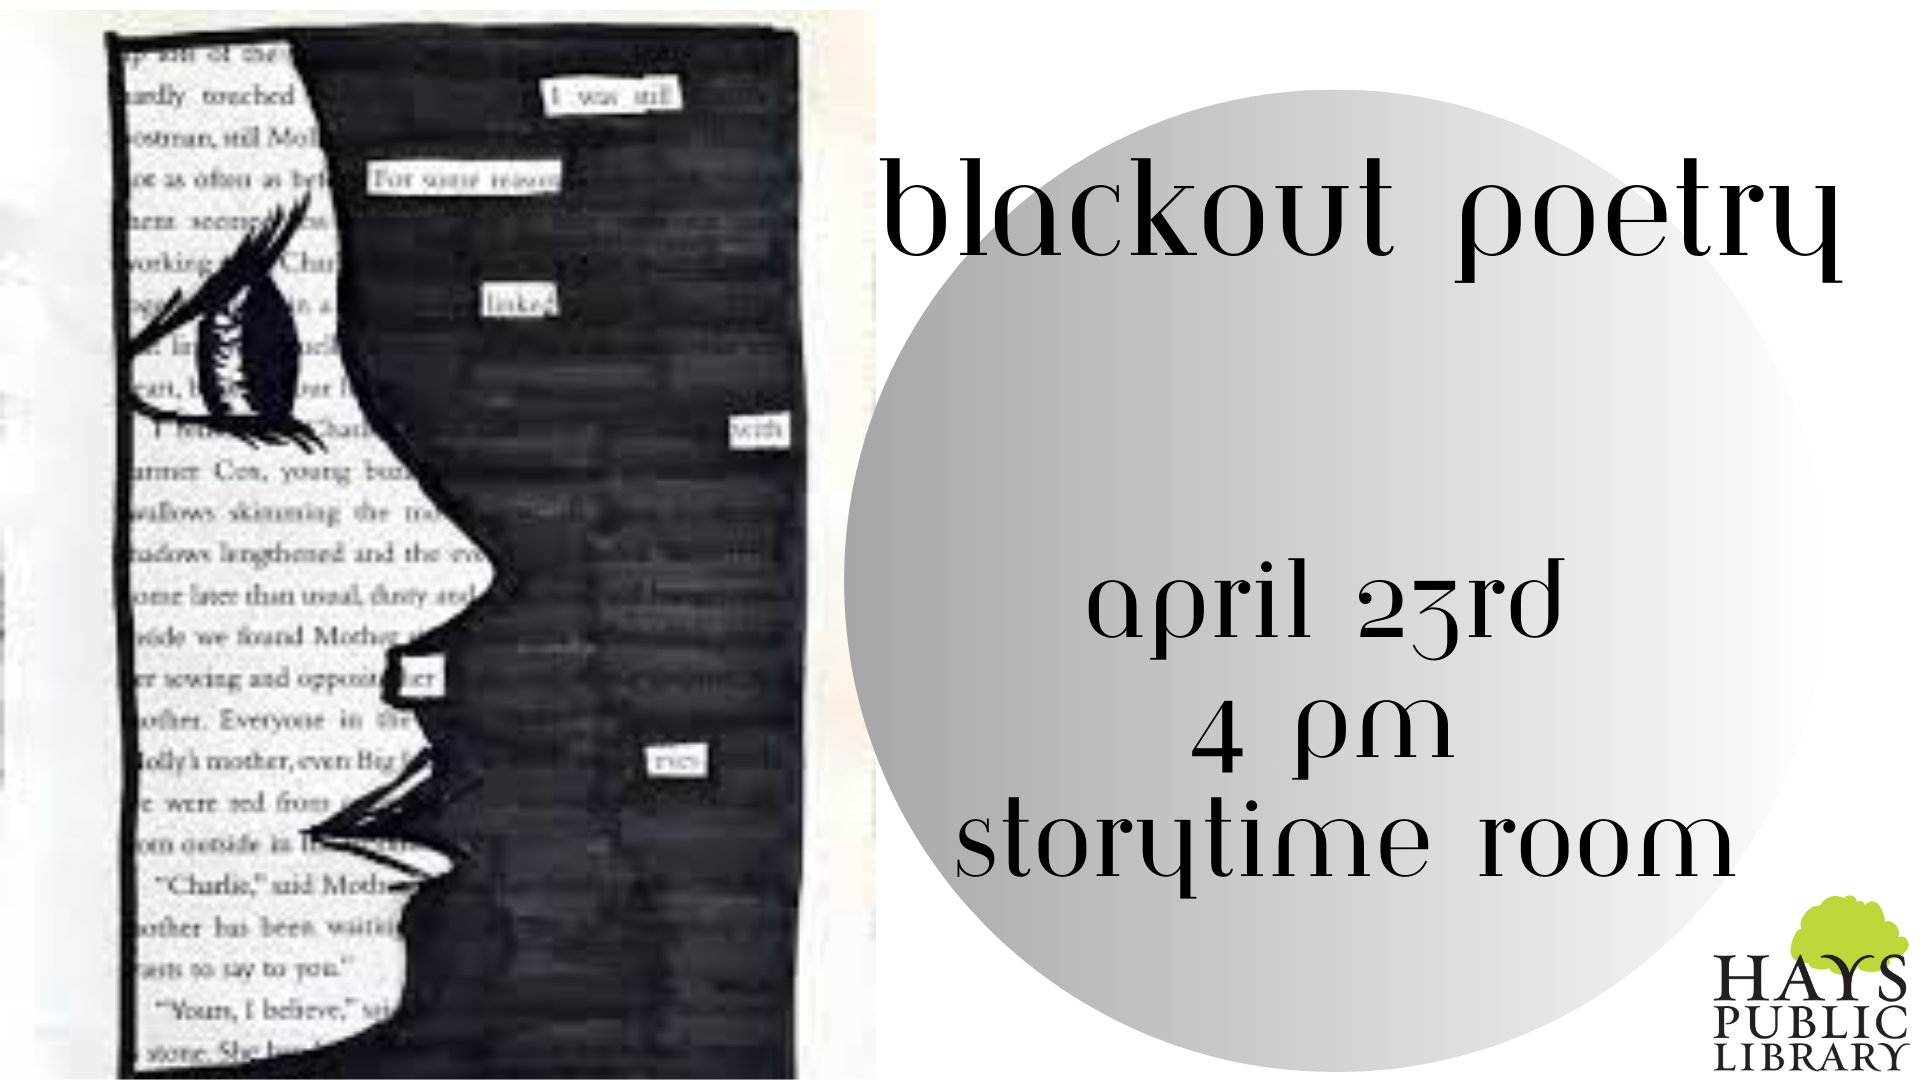 Blackout poetry